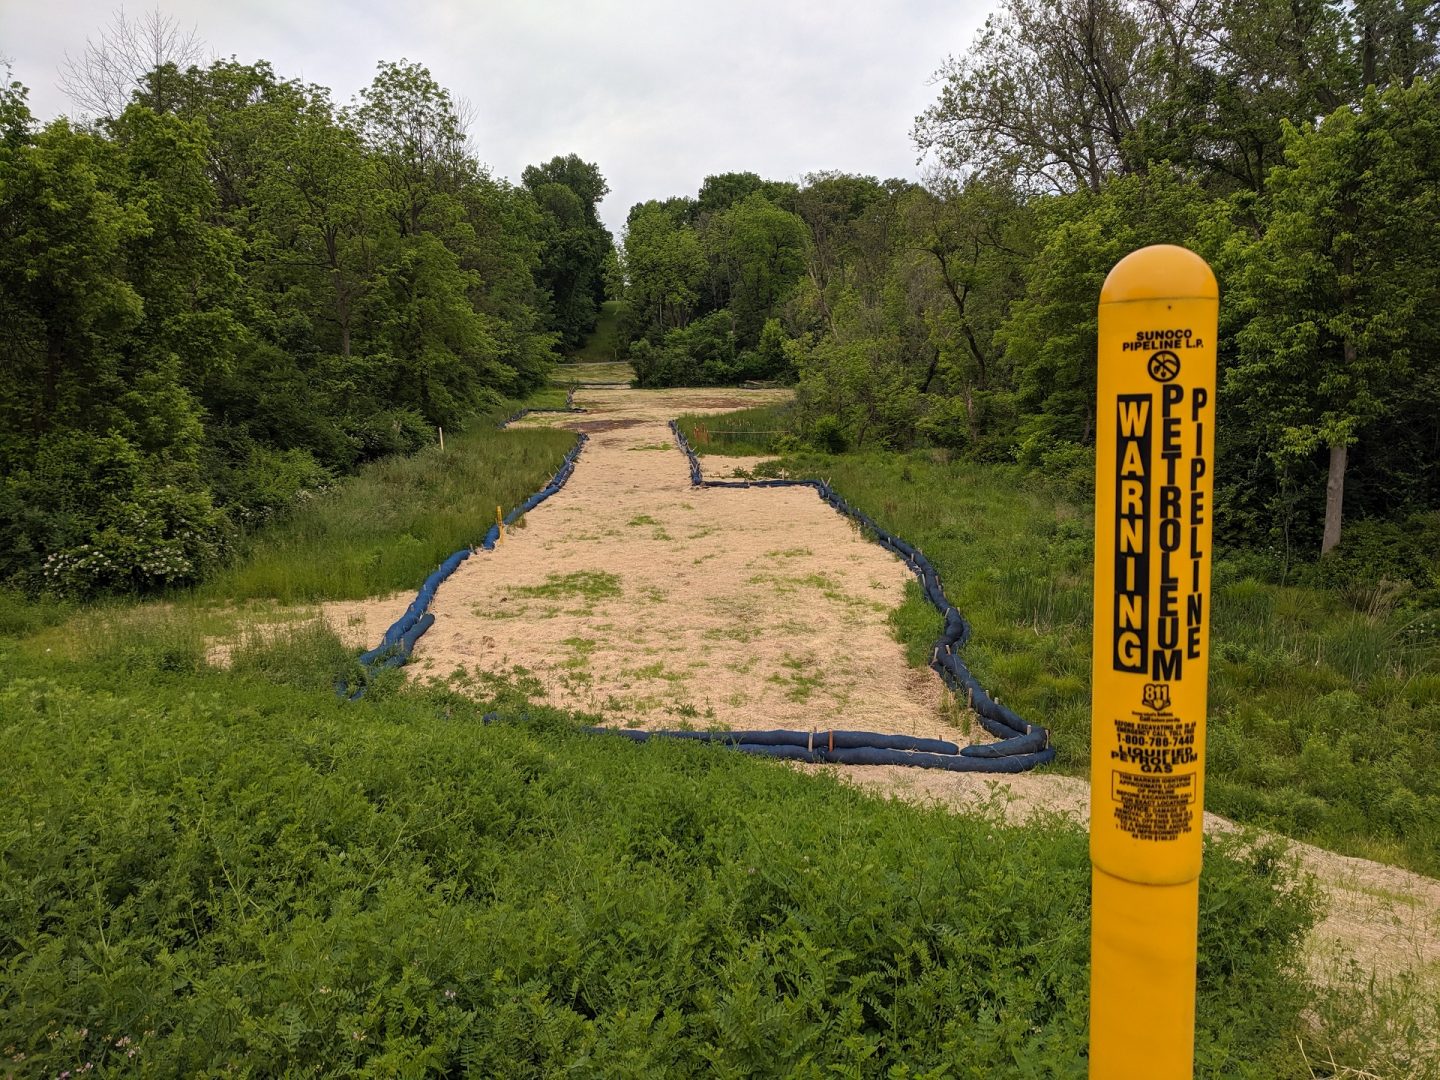 There have been dozens of construction problems at the site where the Mariner East pipeline crosses Snitz Creek in Lebanon County. The area is seen here on June 1, 2021.